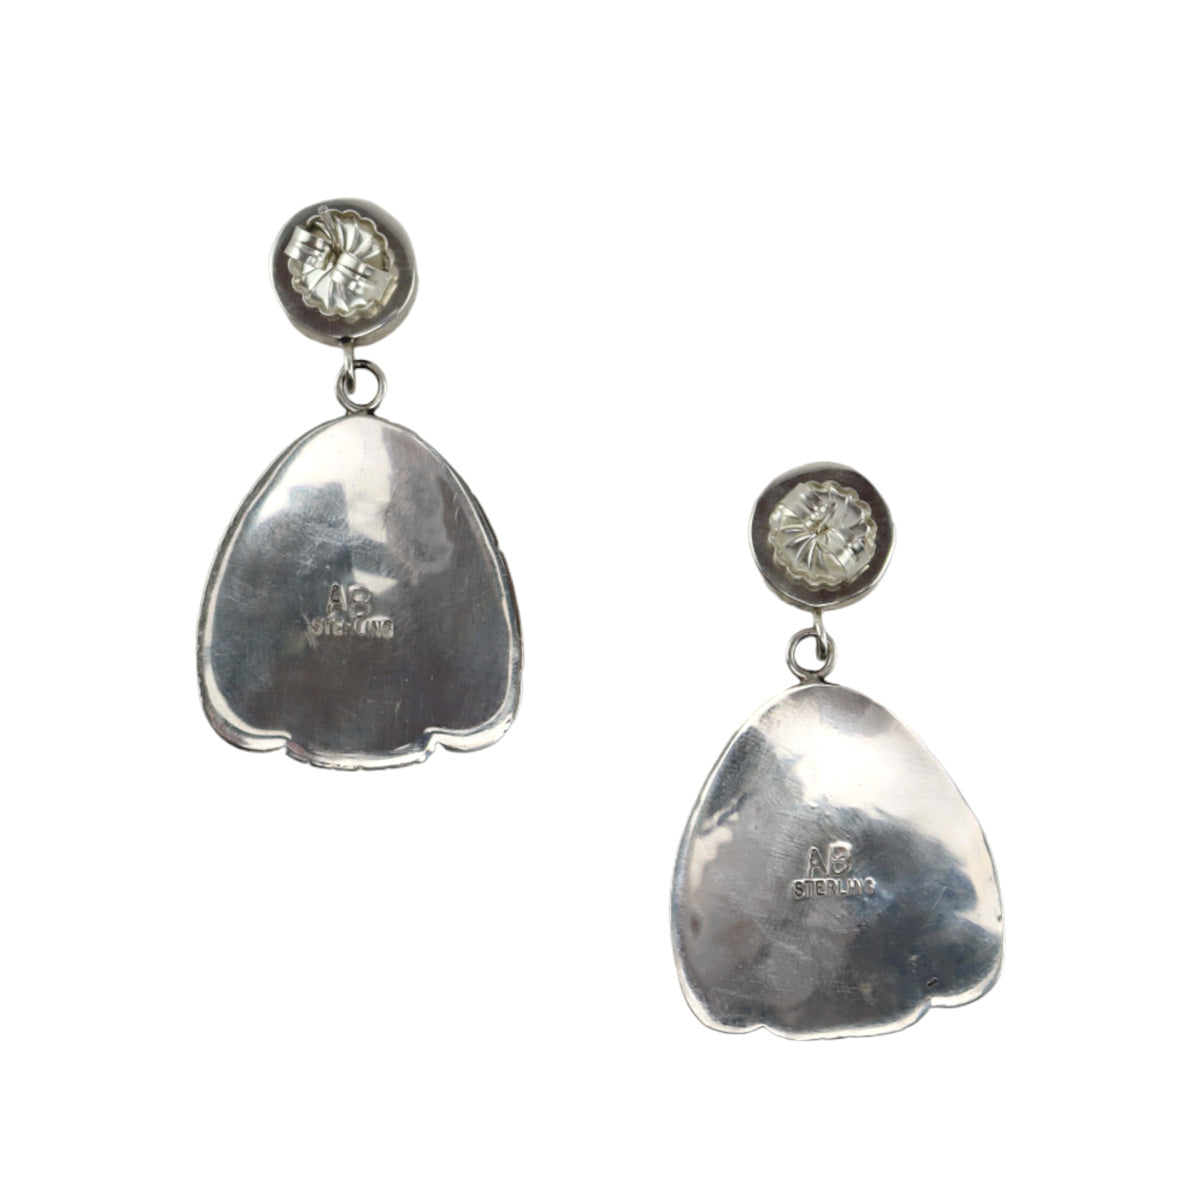 Abraham Begay - Navajo - Contemporary Multi-Stone Inlay and Sterling Silver Overlay Post Earrings, 2" x 1.125" (J16076)